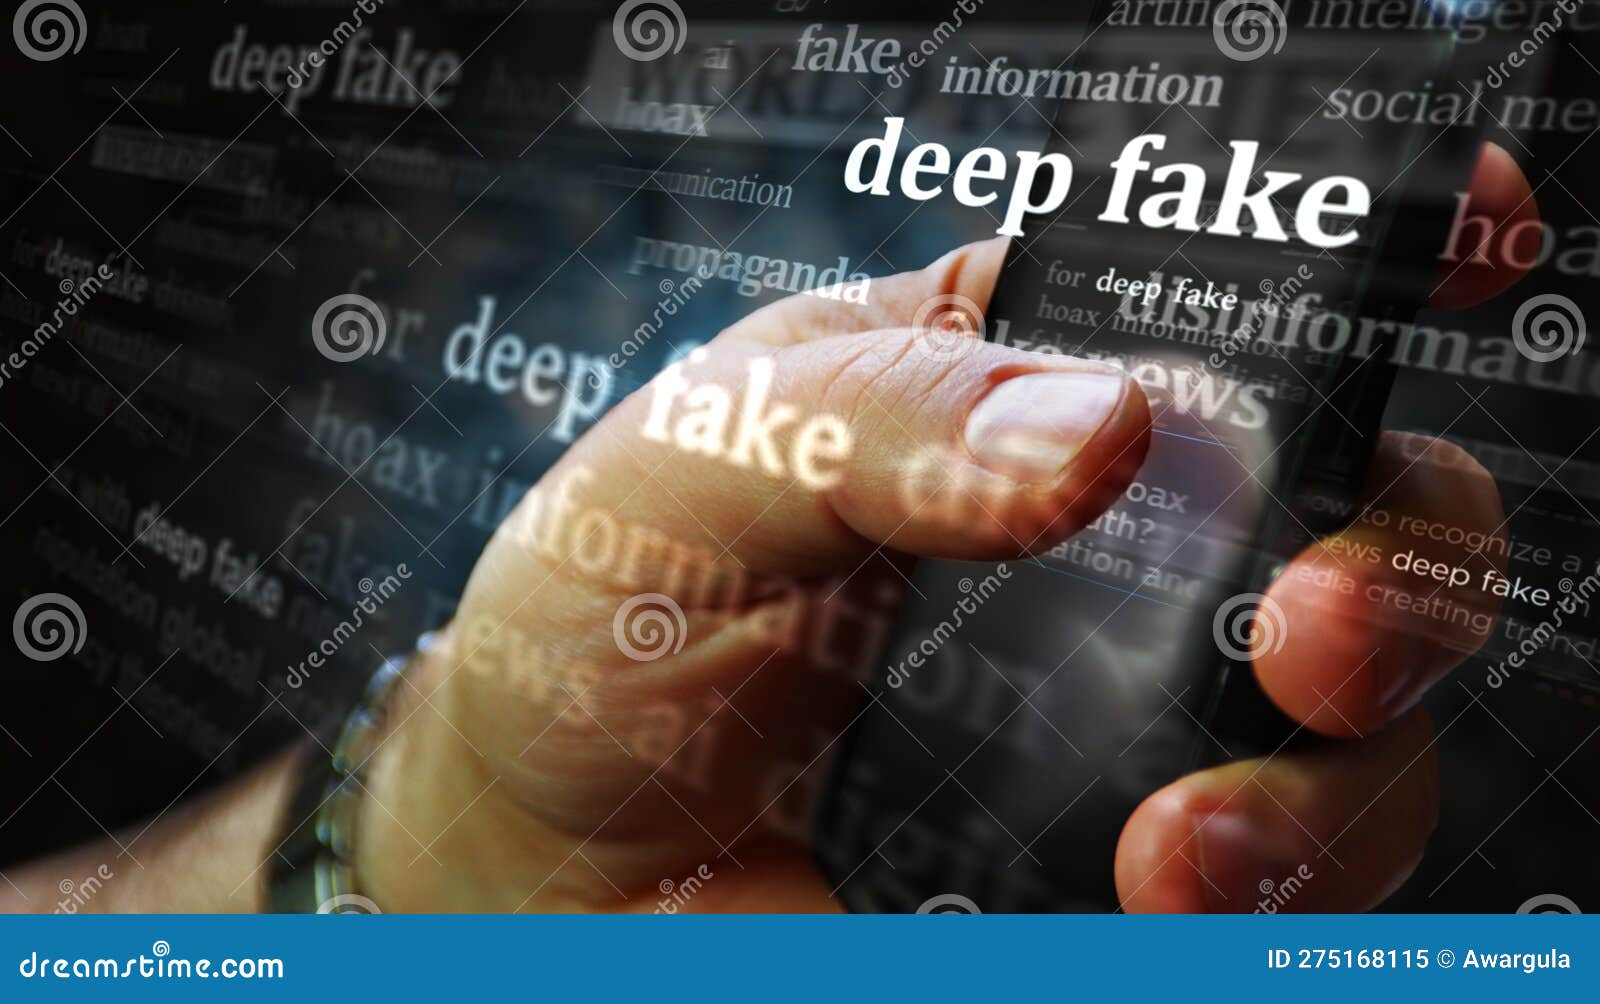 deep fake hoax and manipulation news titles on screen in hand 3d 